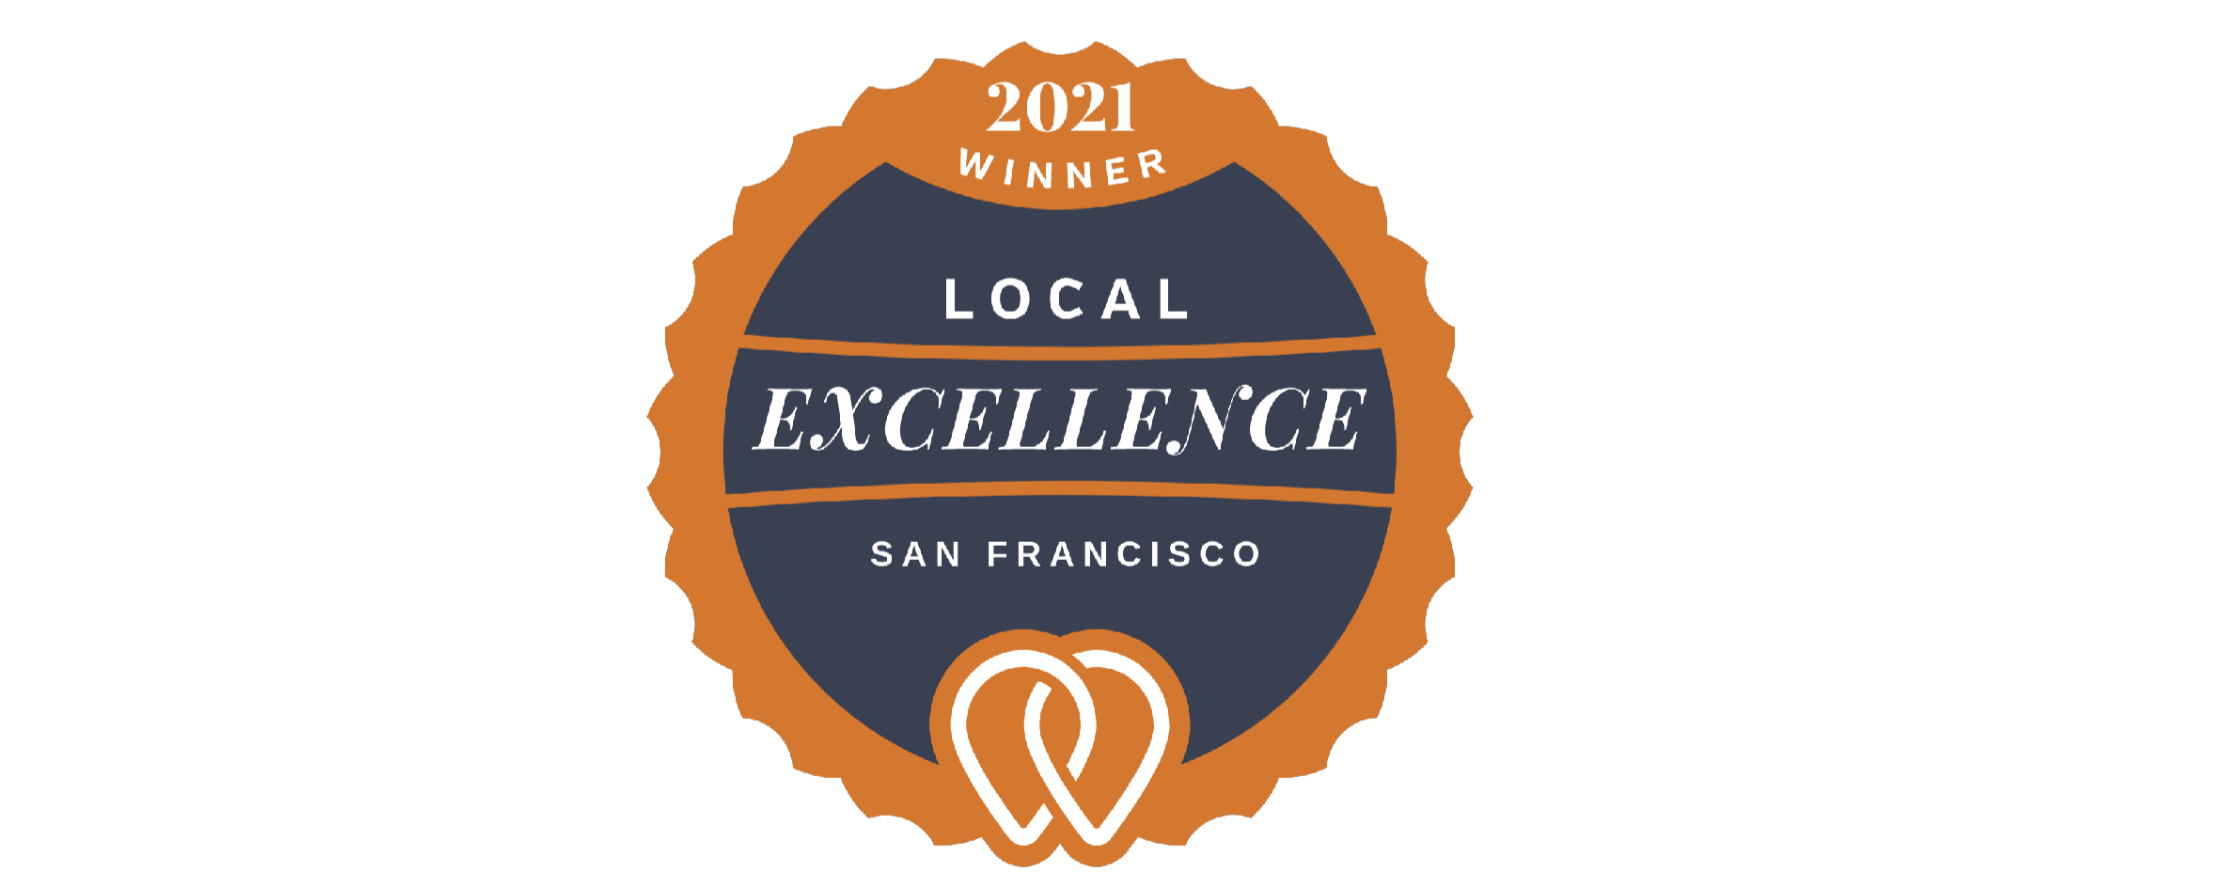 Slow Clap Productions Announced as a 2021 Local Excellence Award Winner on UpCity